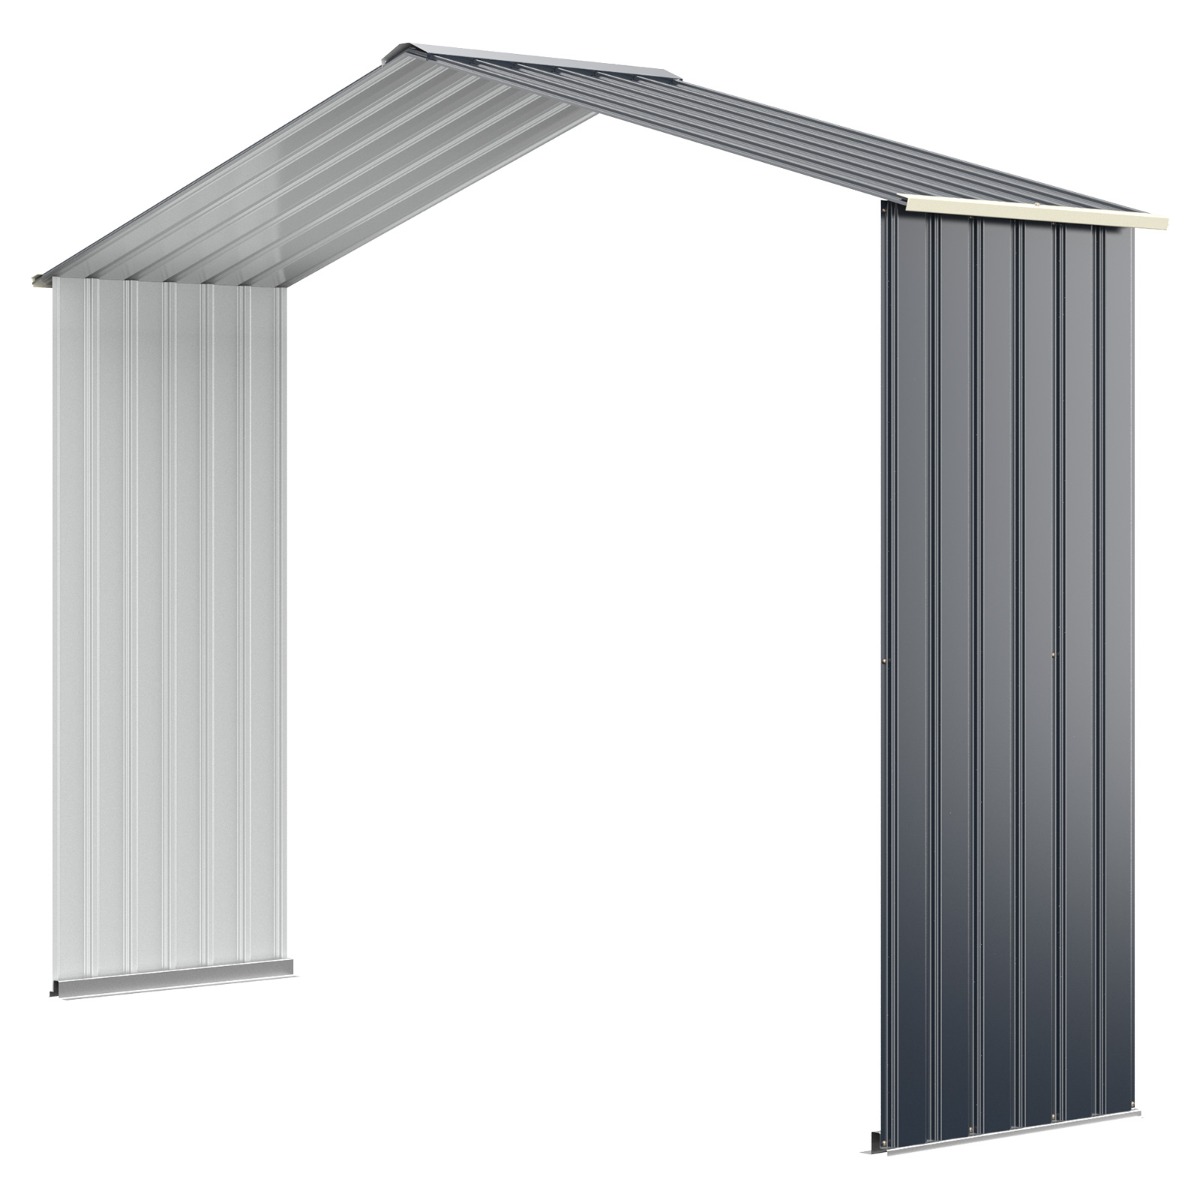 Outdoor Storage Shed Extension Kit for 203 cm Shed Width